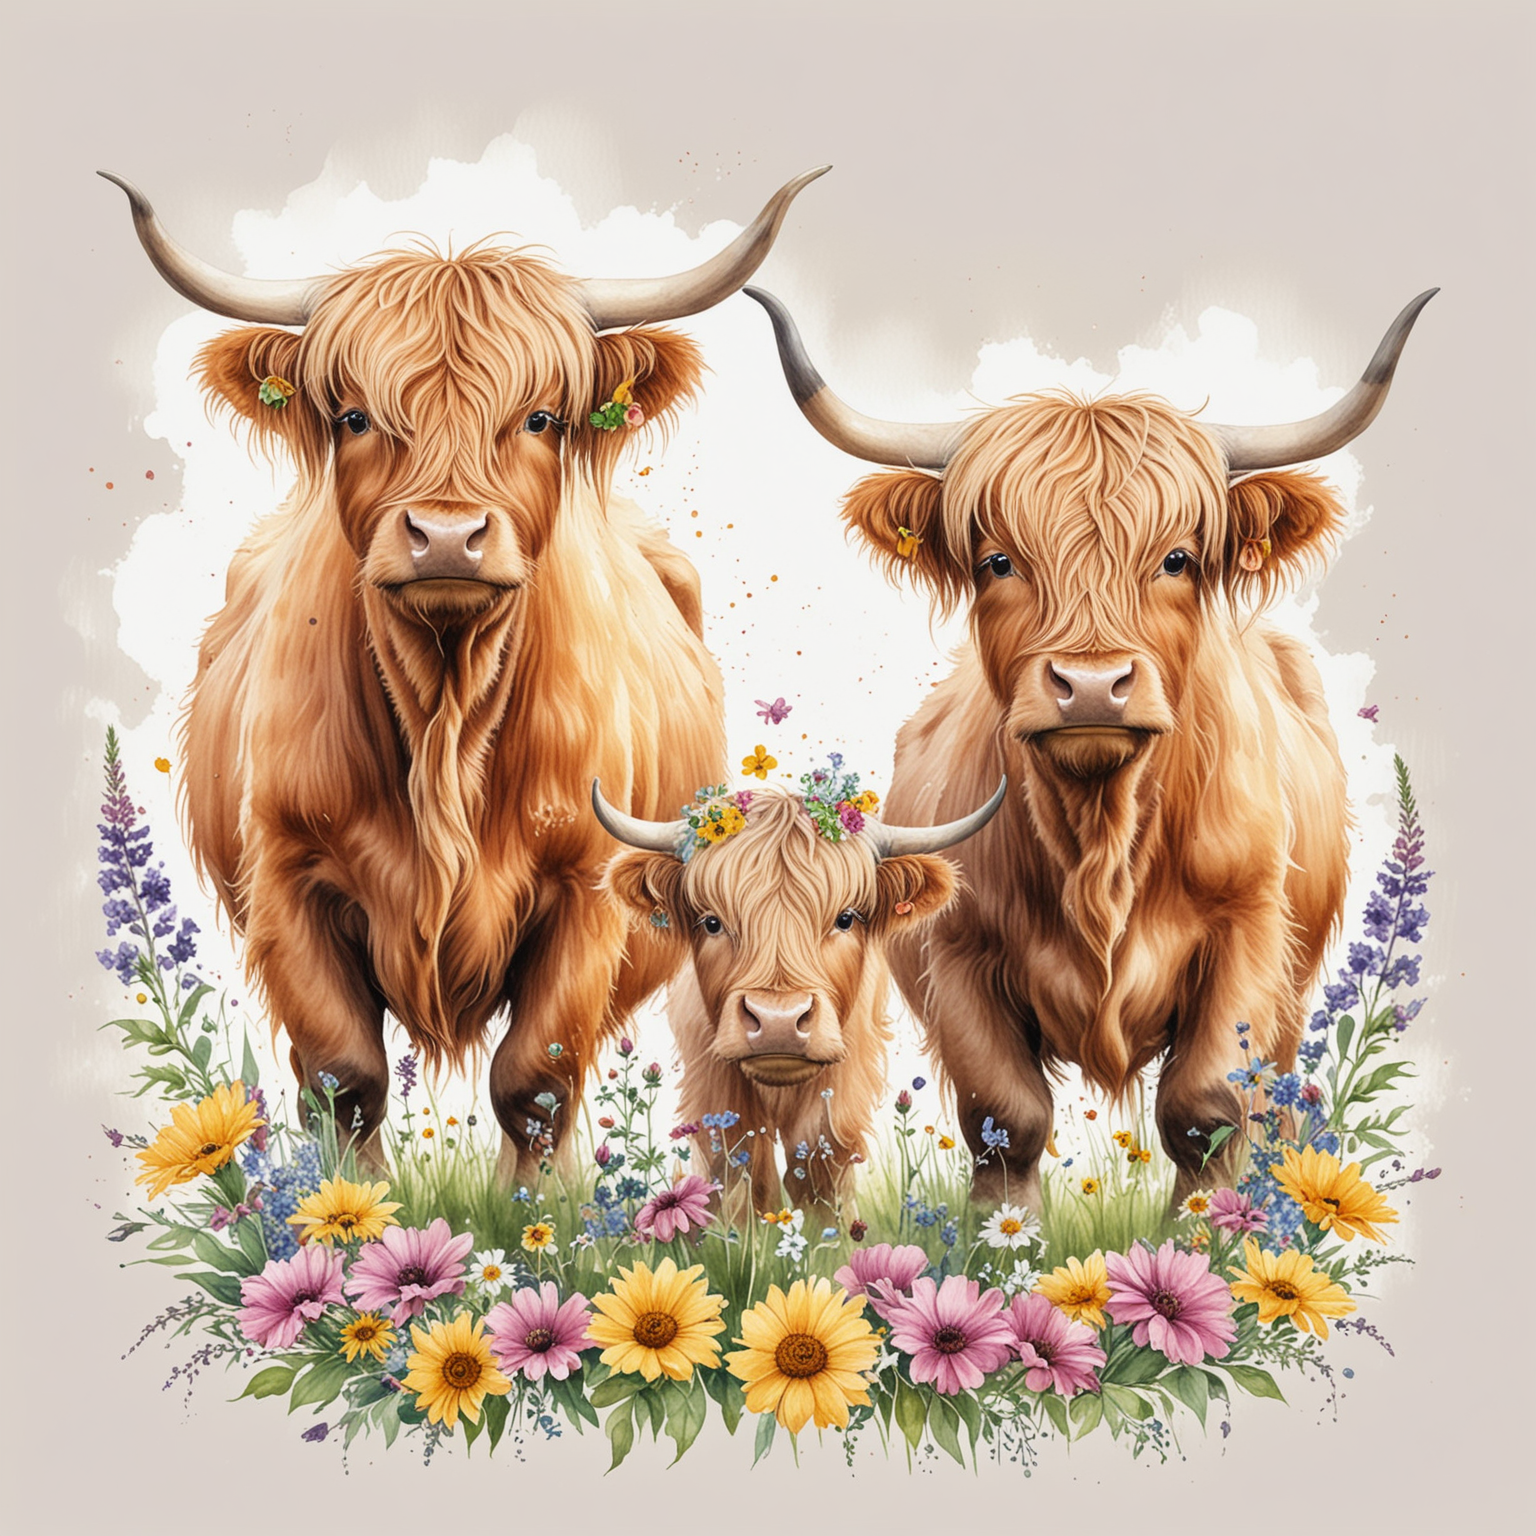 Highland Cows Watercolor Illustration with Delicate Flowers on White Background